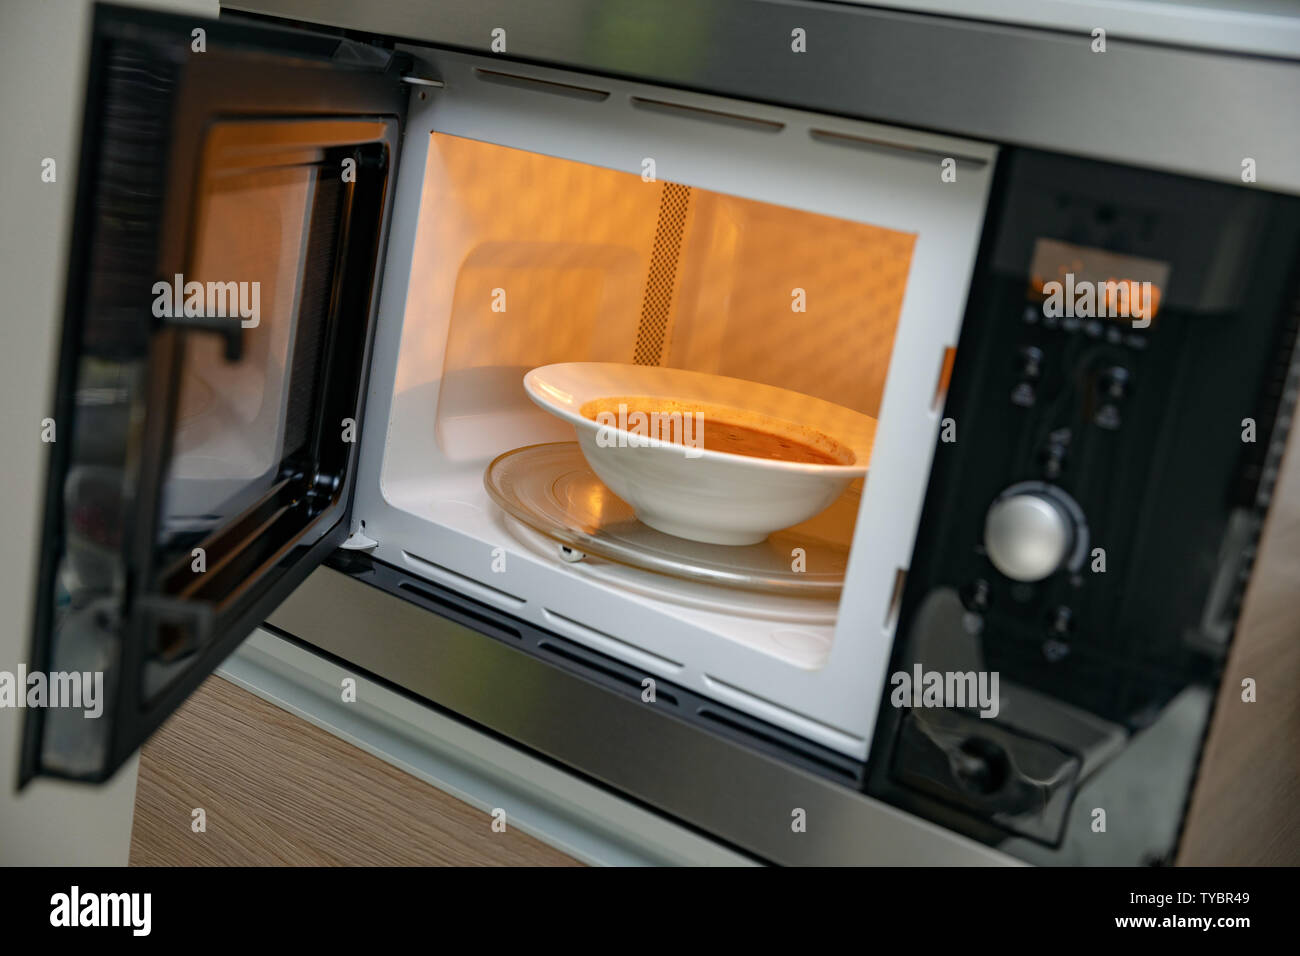 heat up food in microwave oven Stock Photo